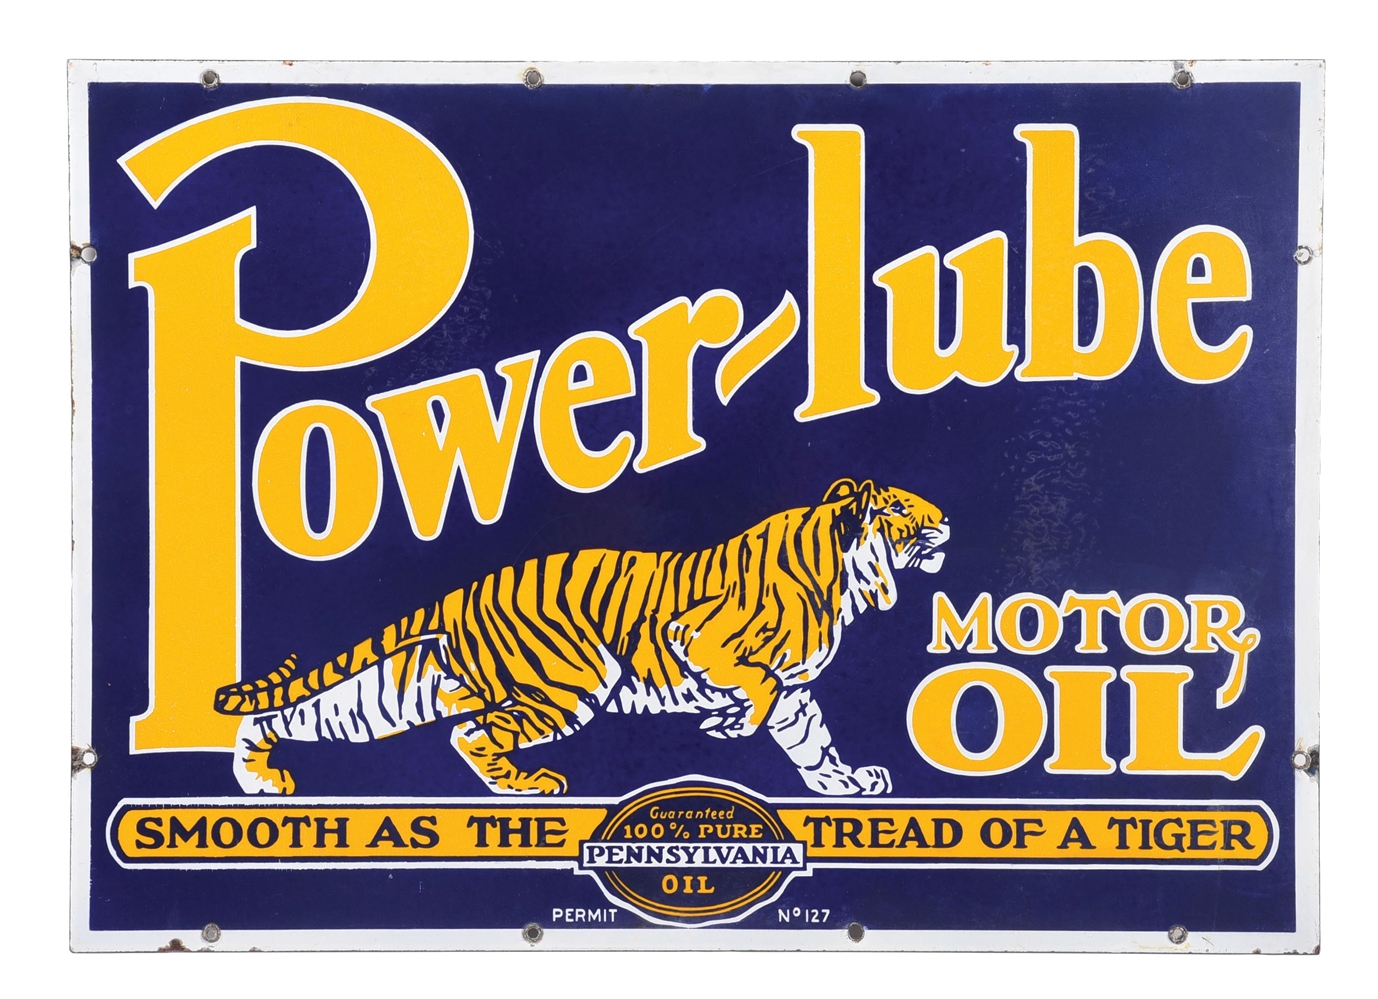 POWERLUBE MOTOR OILS PORCELAIN SERVICE STATION SIGN W/ TIGER GRAPHIC. 